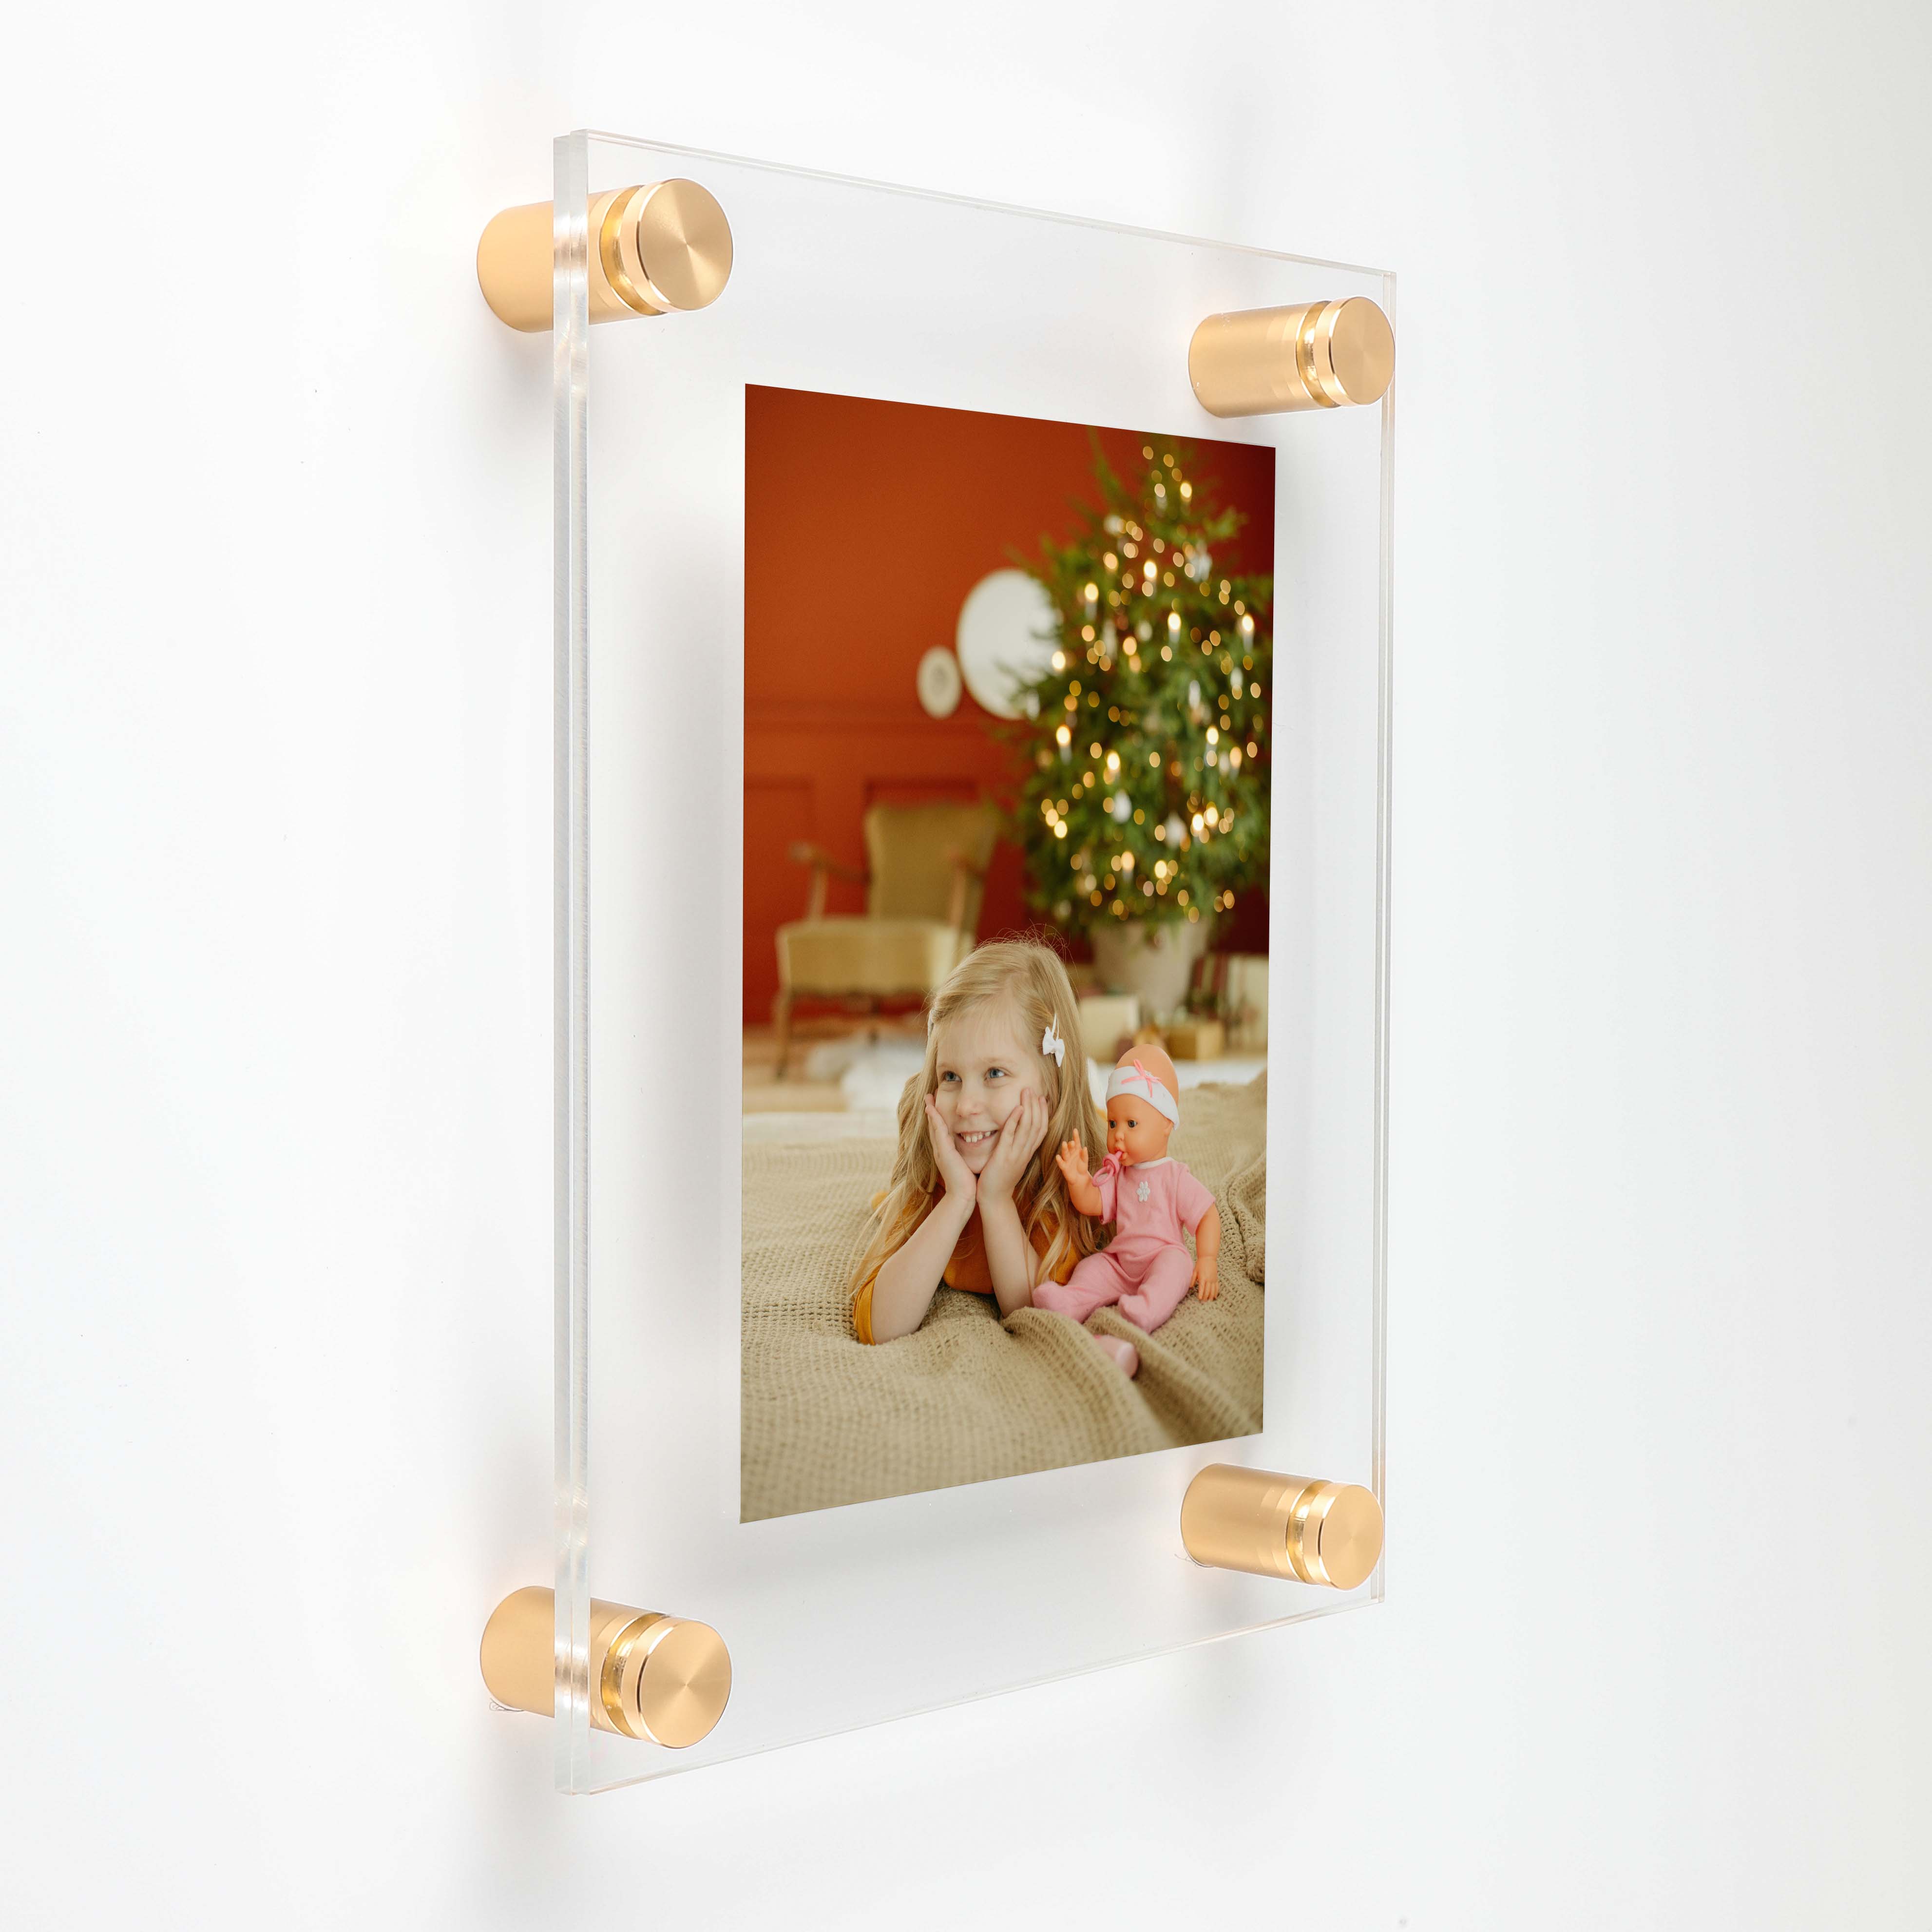 (2) 13-1/2'' x 16-1/2'' Clear Acrylics , Pre-Drilled With Polished Edges (Thick 1/8'' each), Wall Frame with (4) 5/8'' x 1'' Champagne Anodized Aluminum Standoffs includes Screws and Anchors